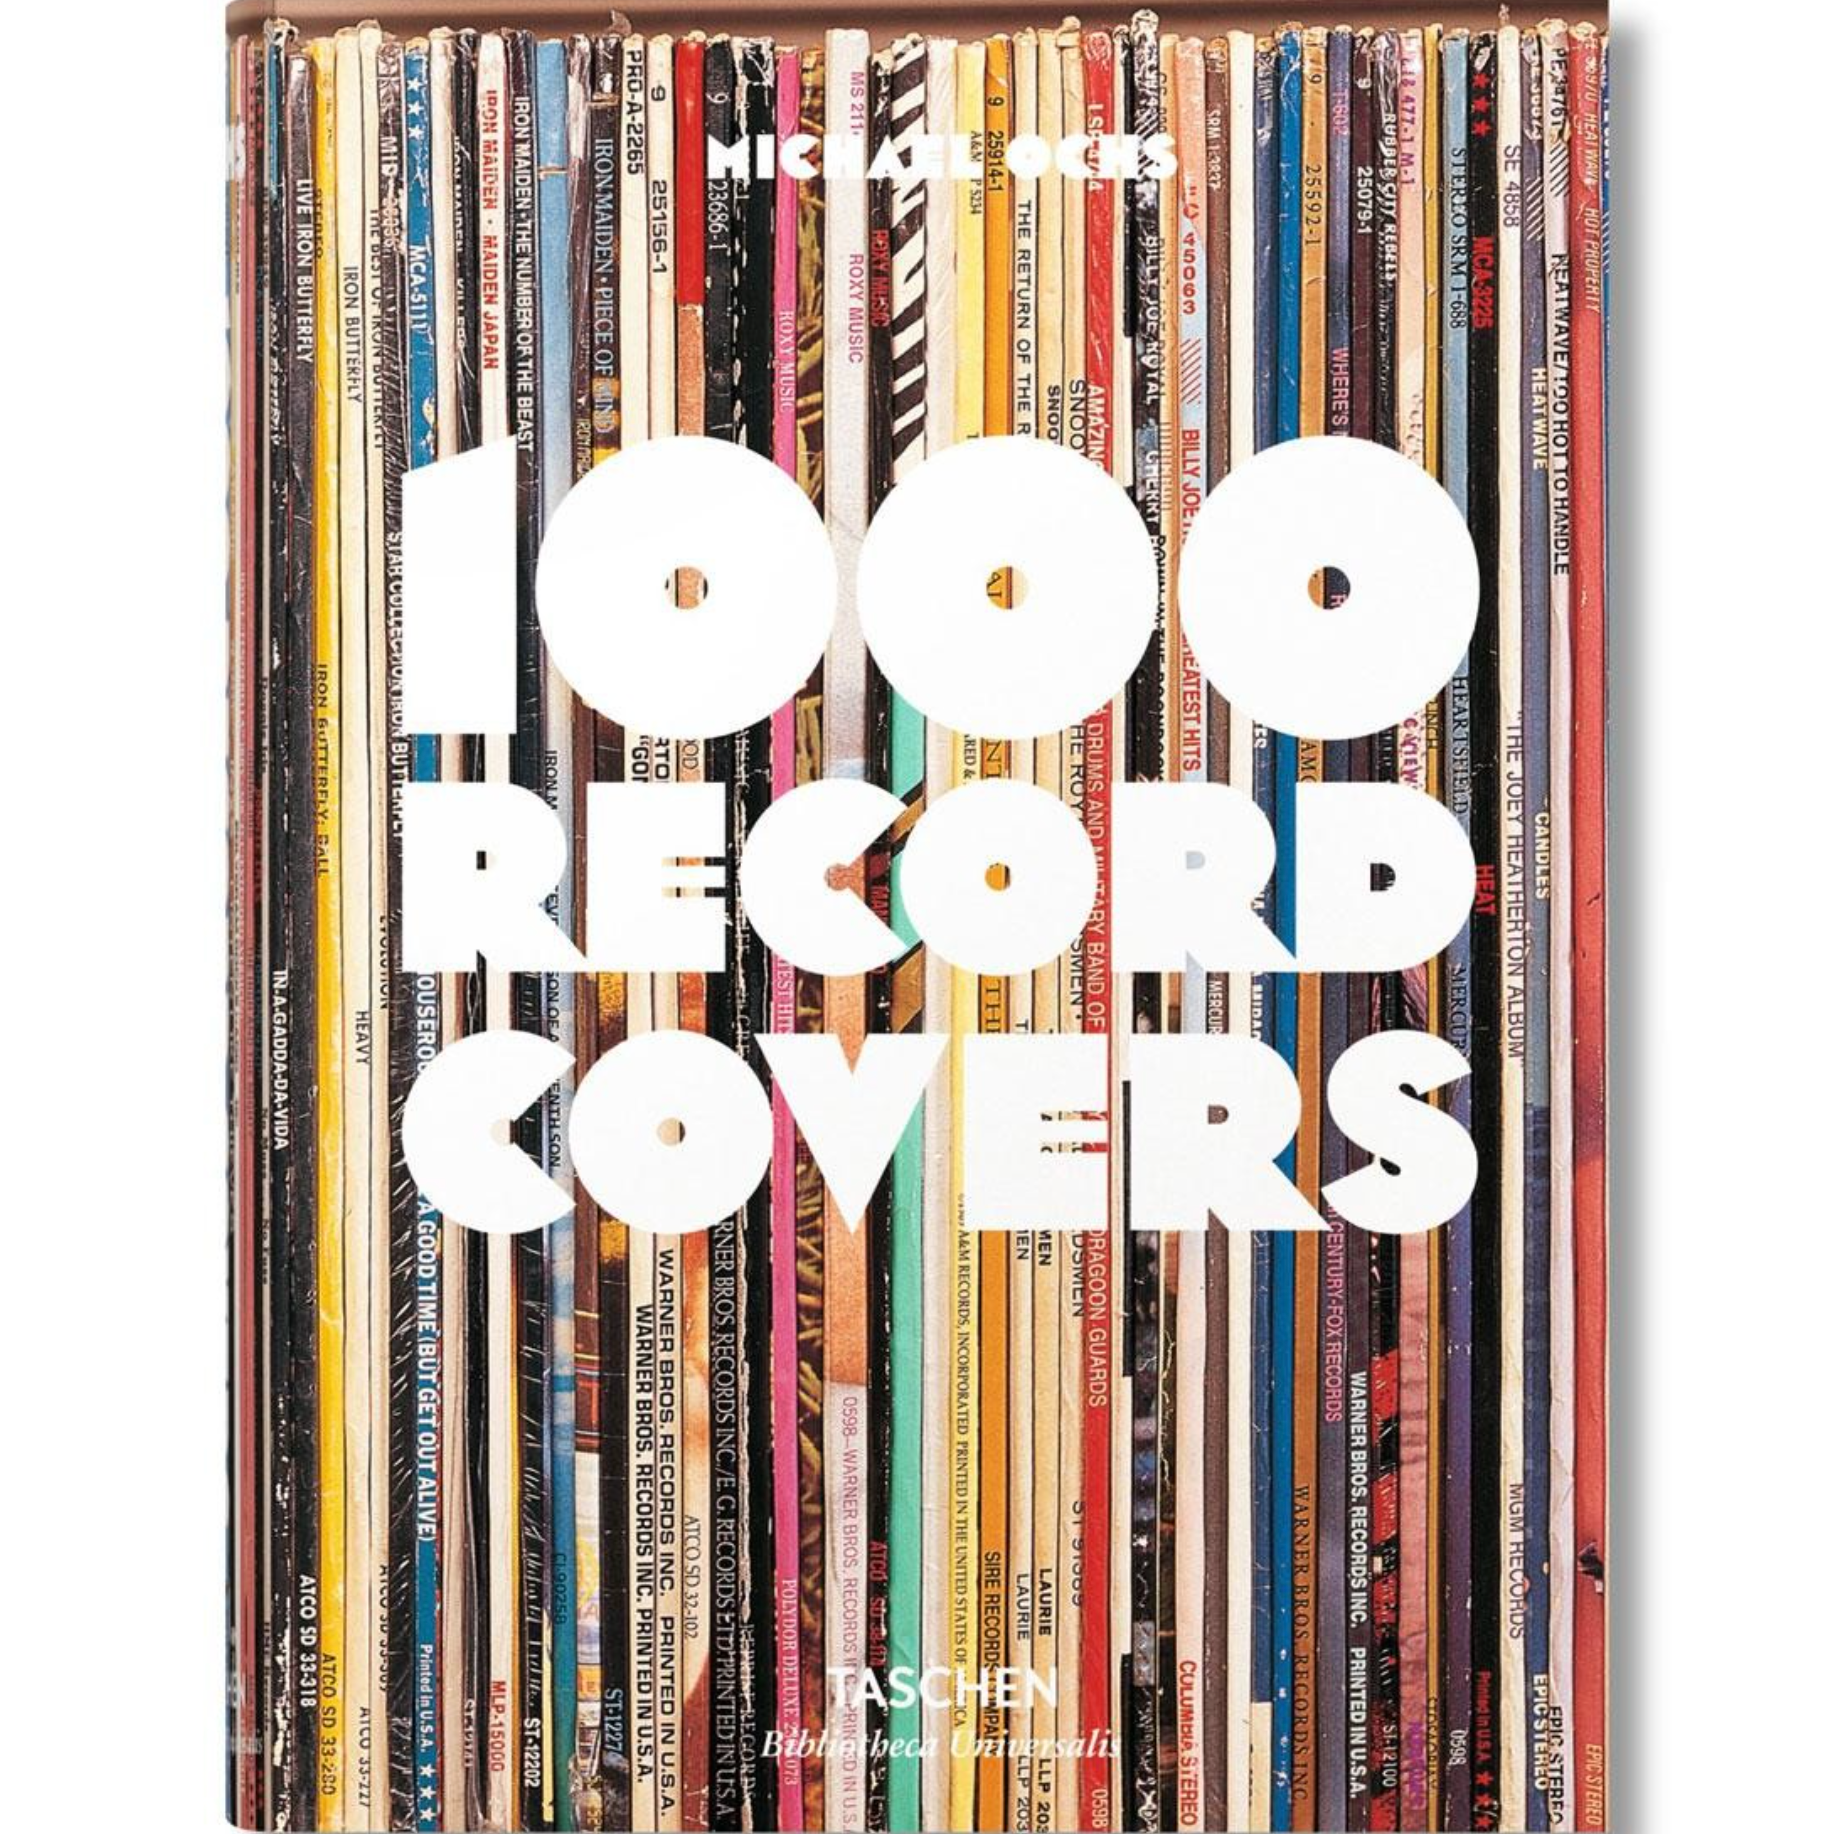 1000 Record Covers (Hardcover) by Michael Ochs